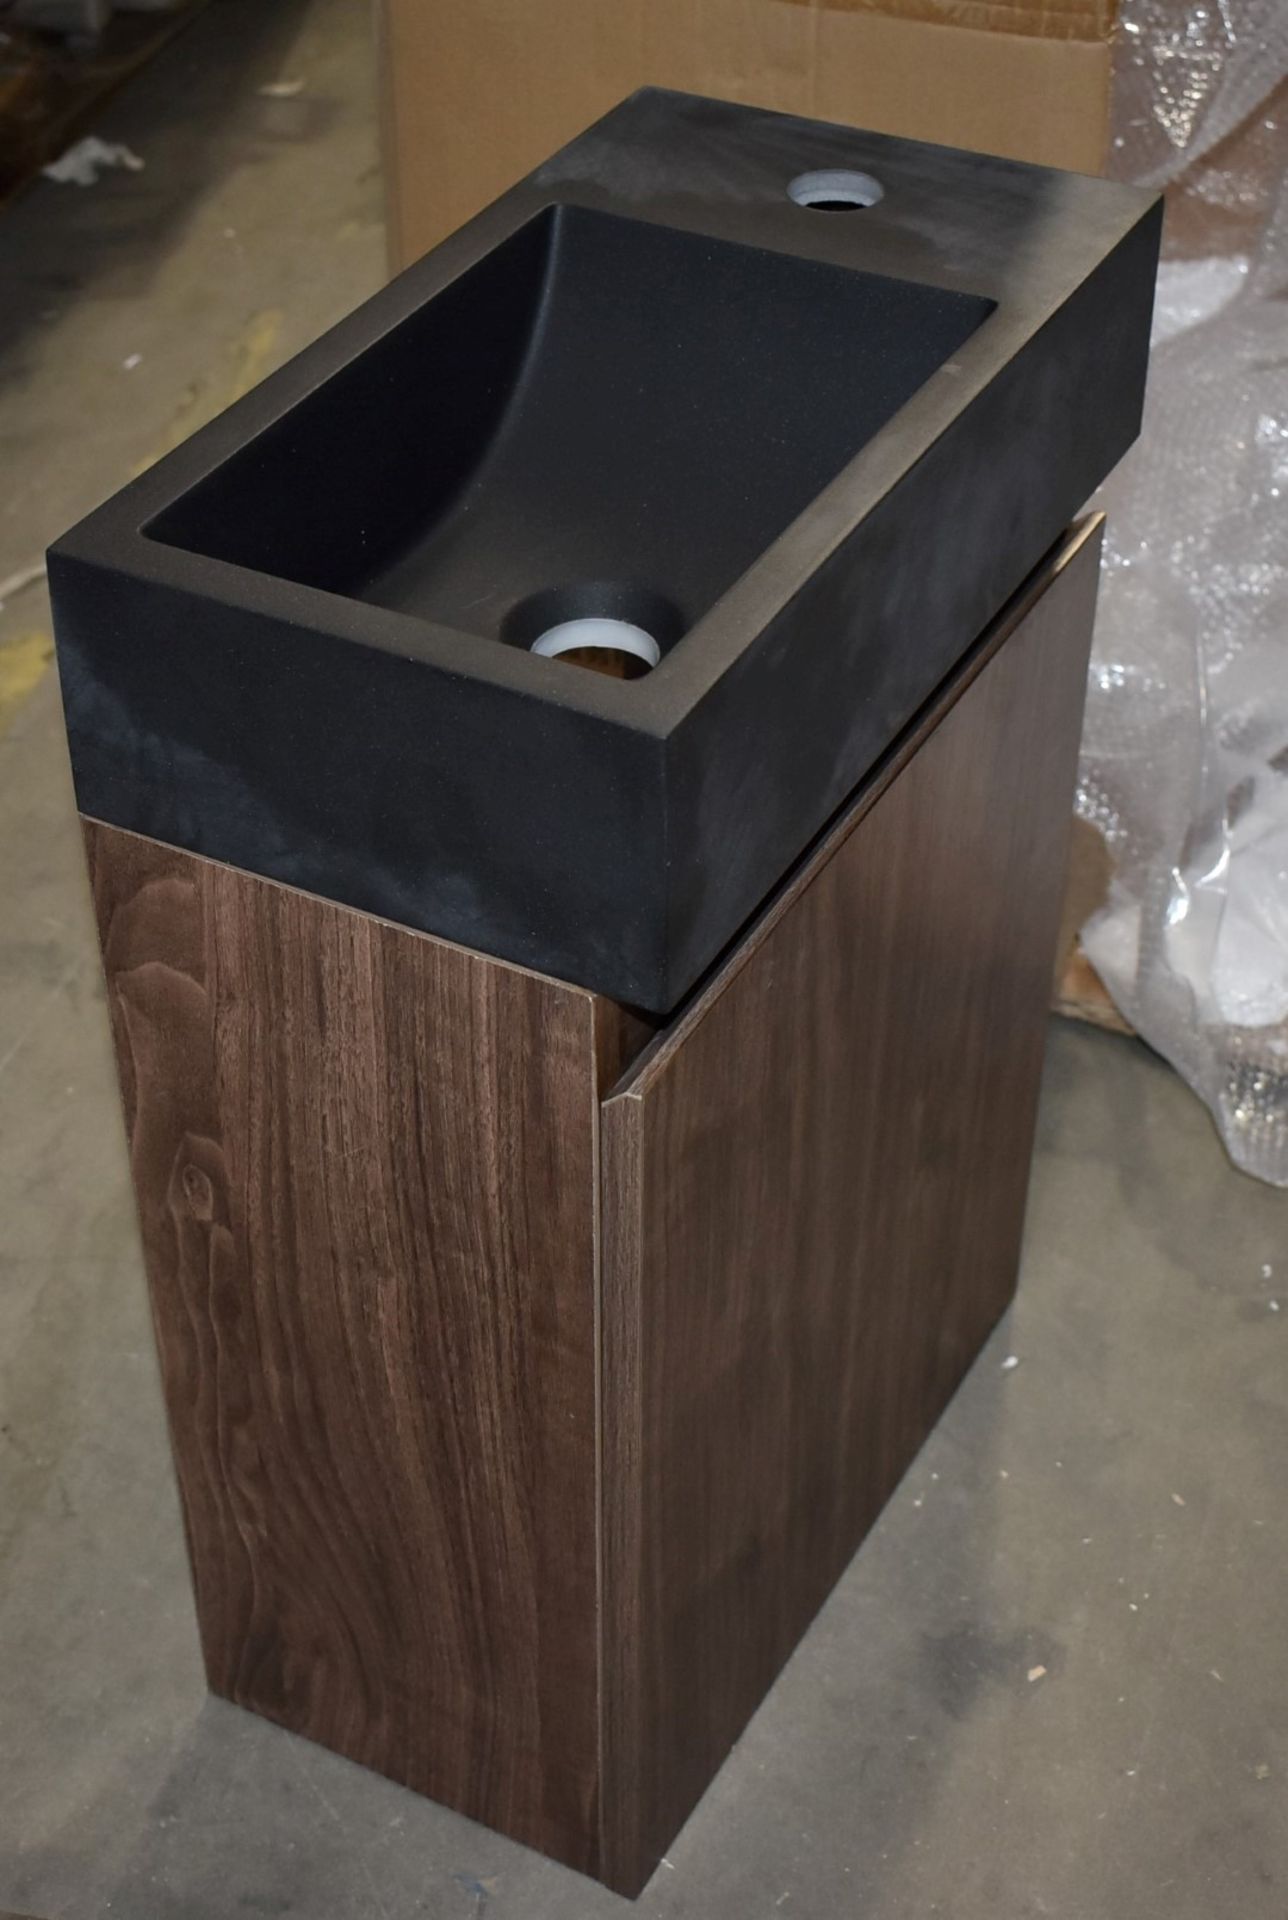 1 x Sjhort Projection Contemporary Wall Mounted Vanity Unit With Wash Basin - Walnut Finish and - Image 2 of 5